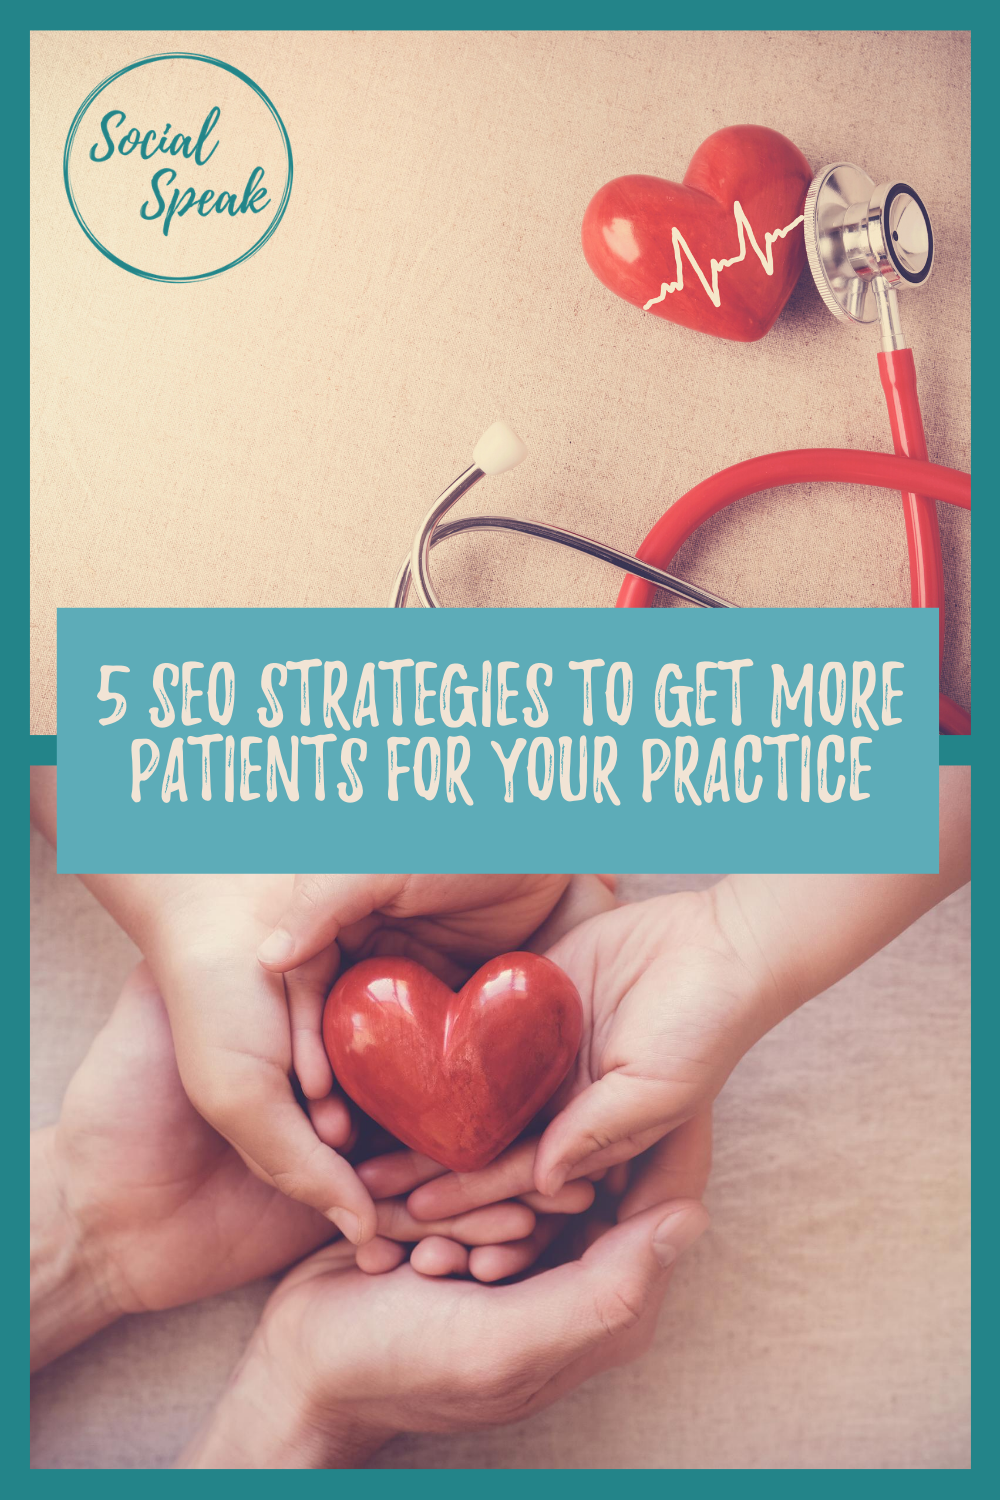 5 SEO Strategies to Get More Patients for Your Practice